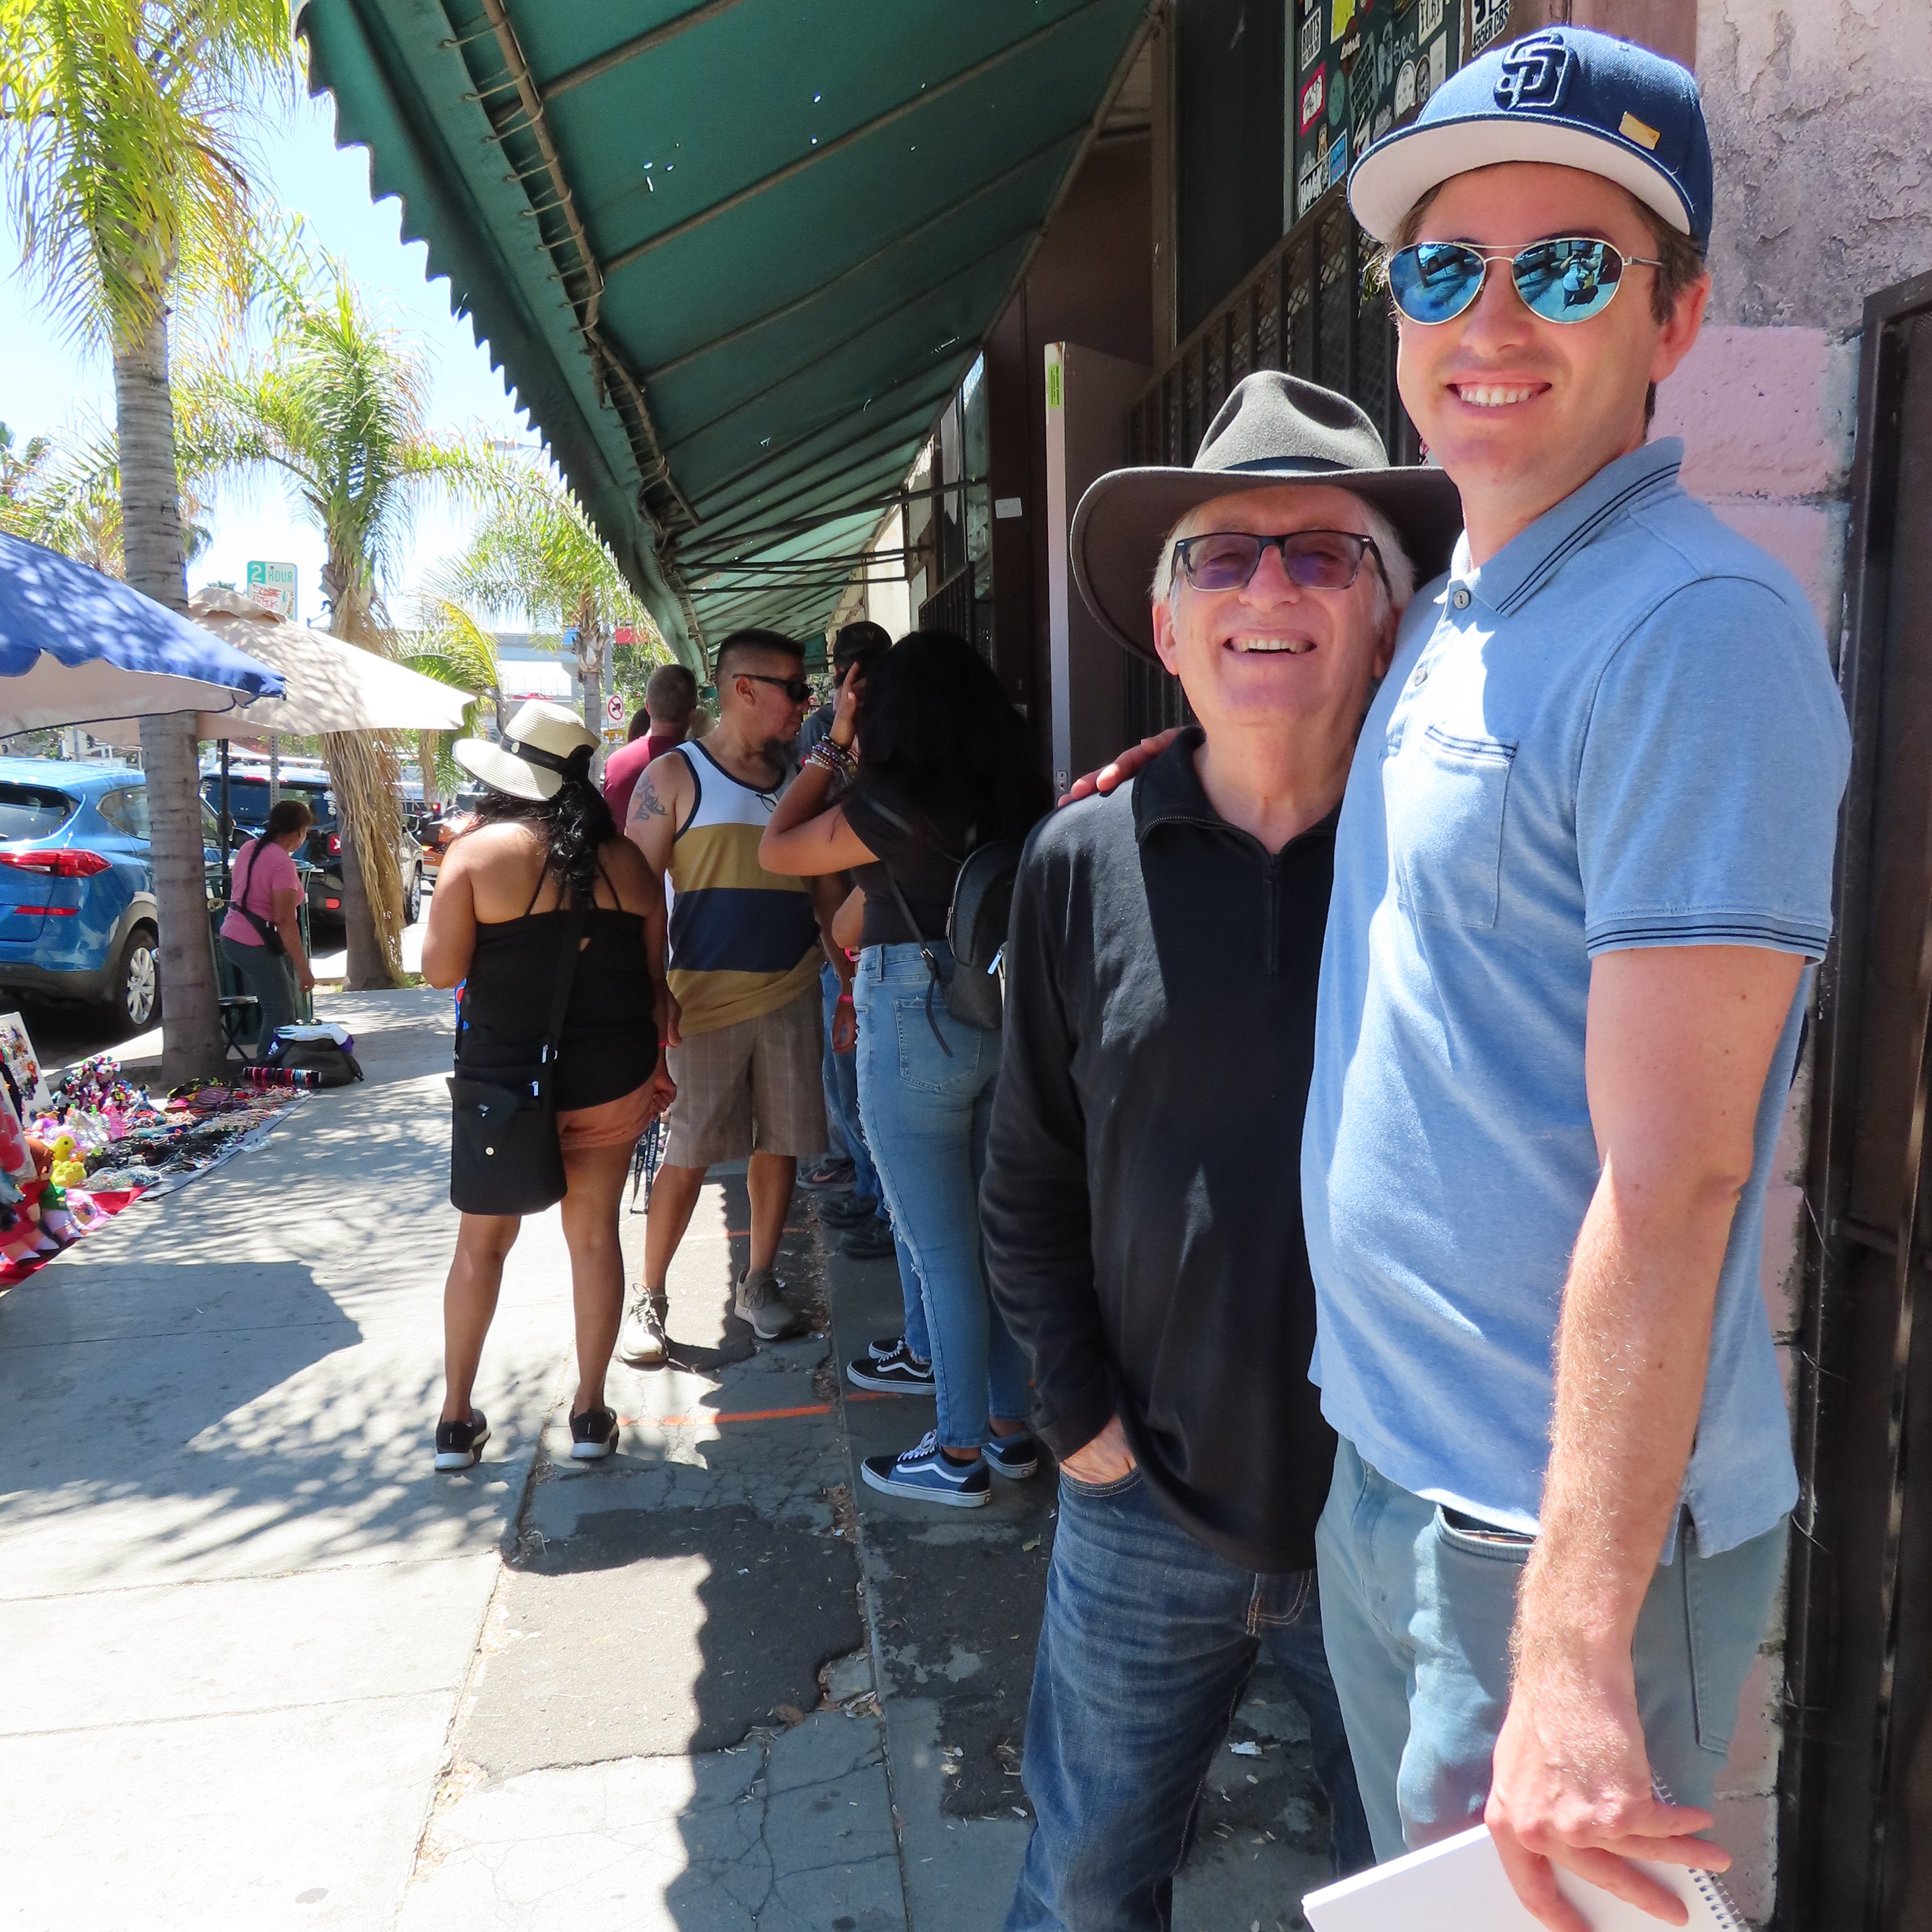 Matthew and Bob, his dad in line at Las Cuatro Milpas. They smile. Matthew has sunglasses and a SD hat on. Bob has jeans, a black shirt and a green sunhat on. There are people milling about, waiting in the background.